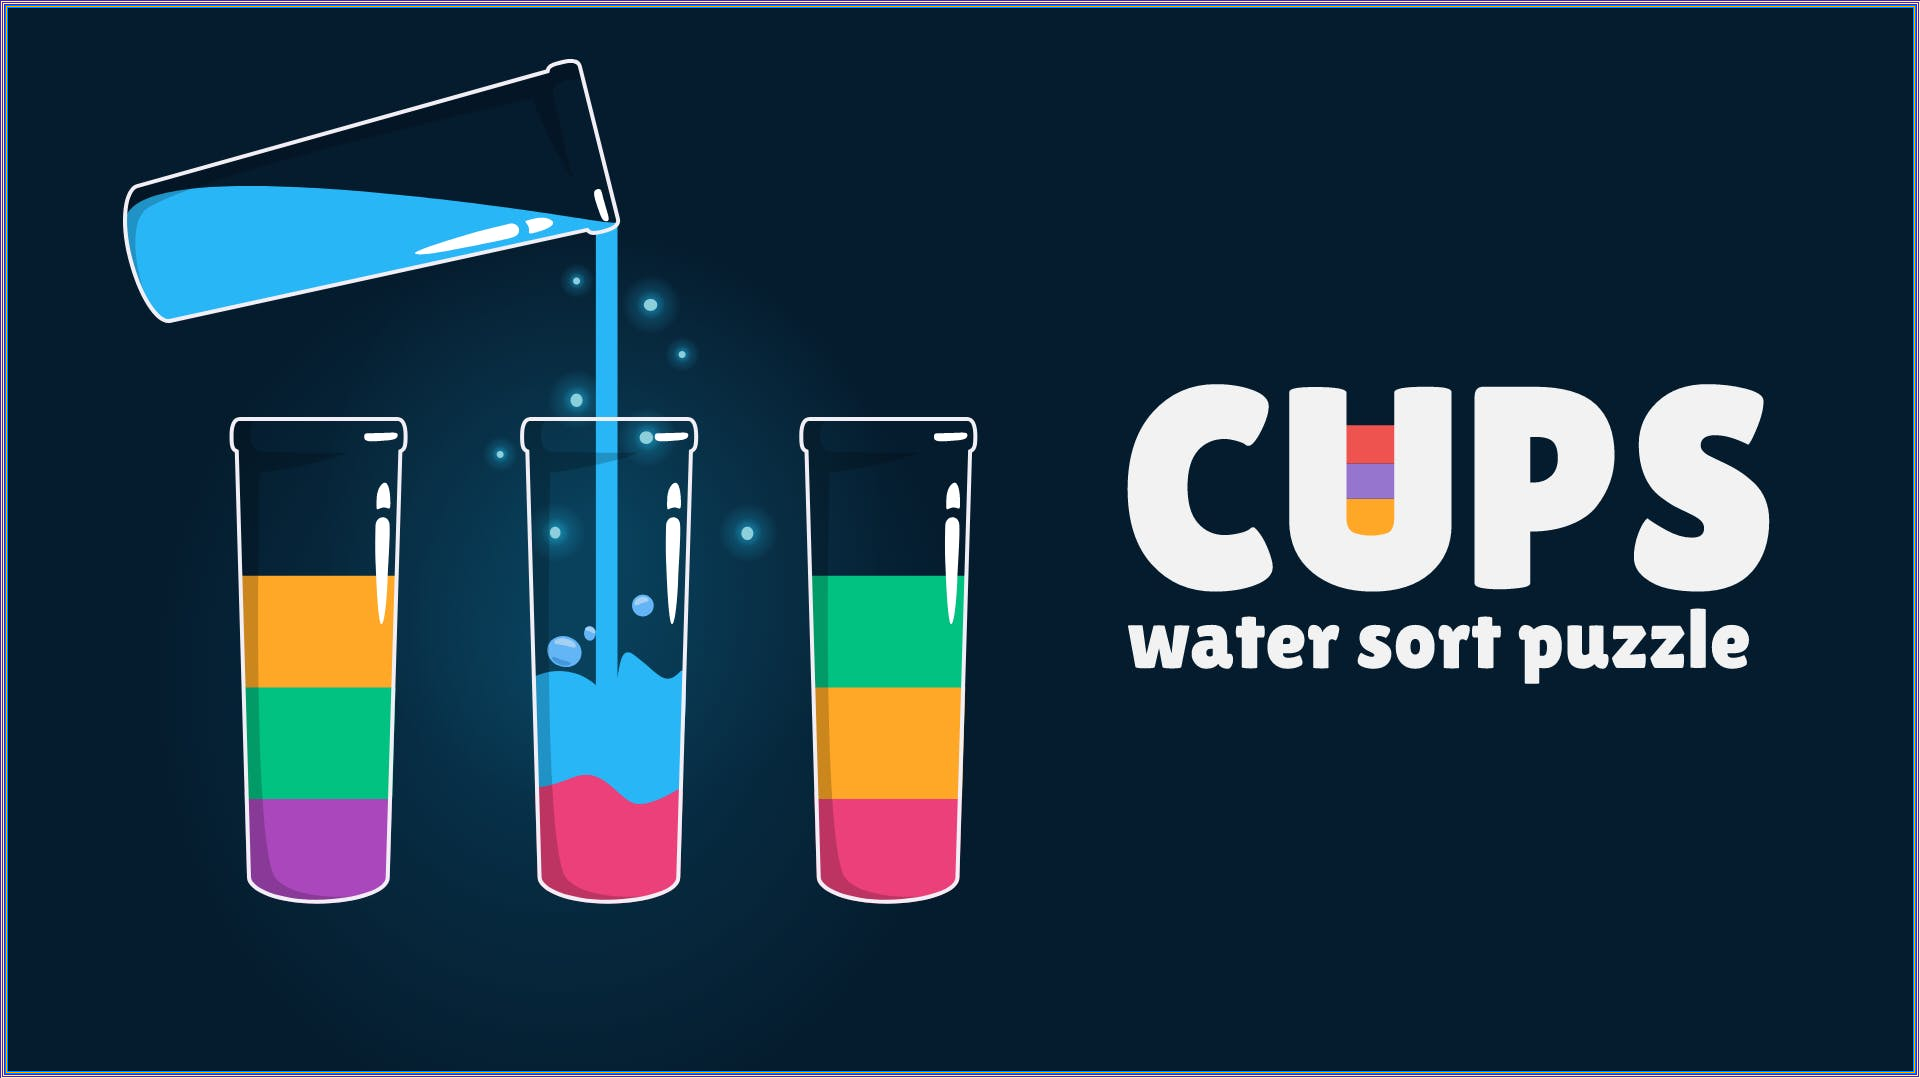 https://wordhurdle.co/upload/imgs/game/cups-water-sort-puzzle-cover.png